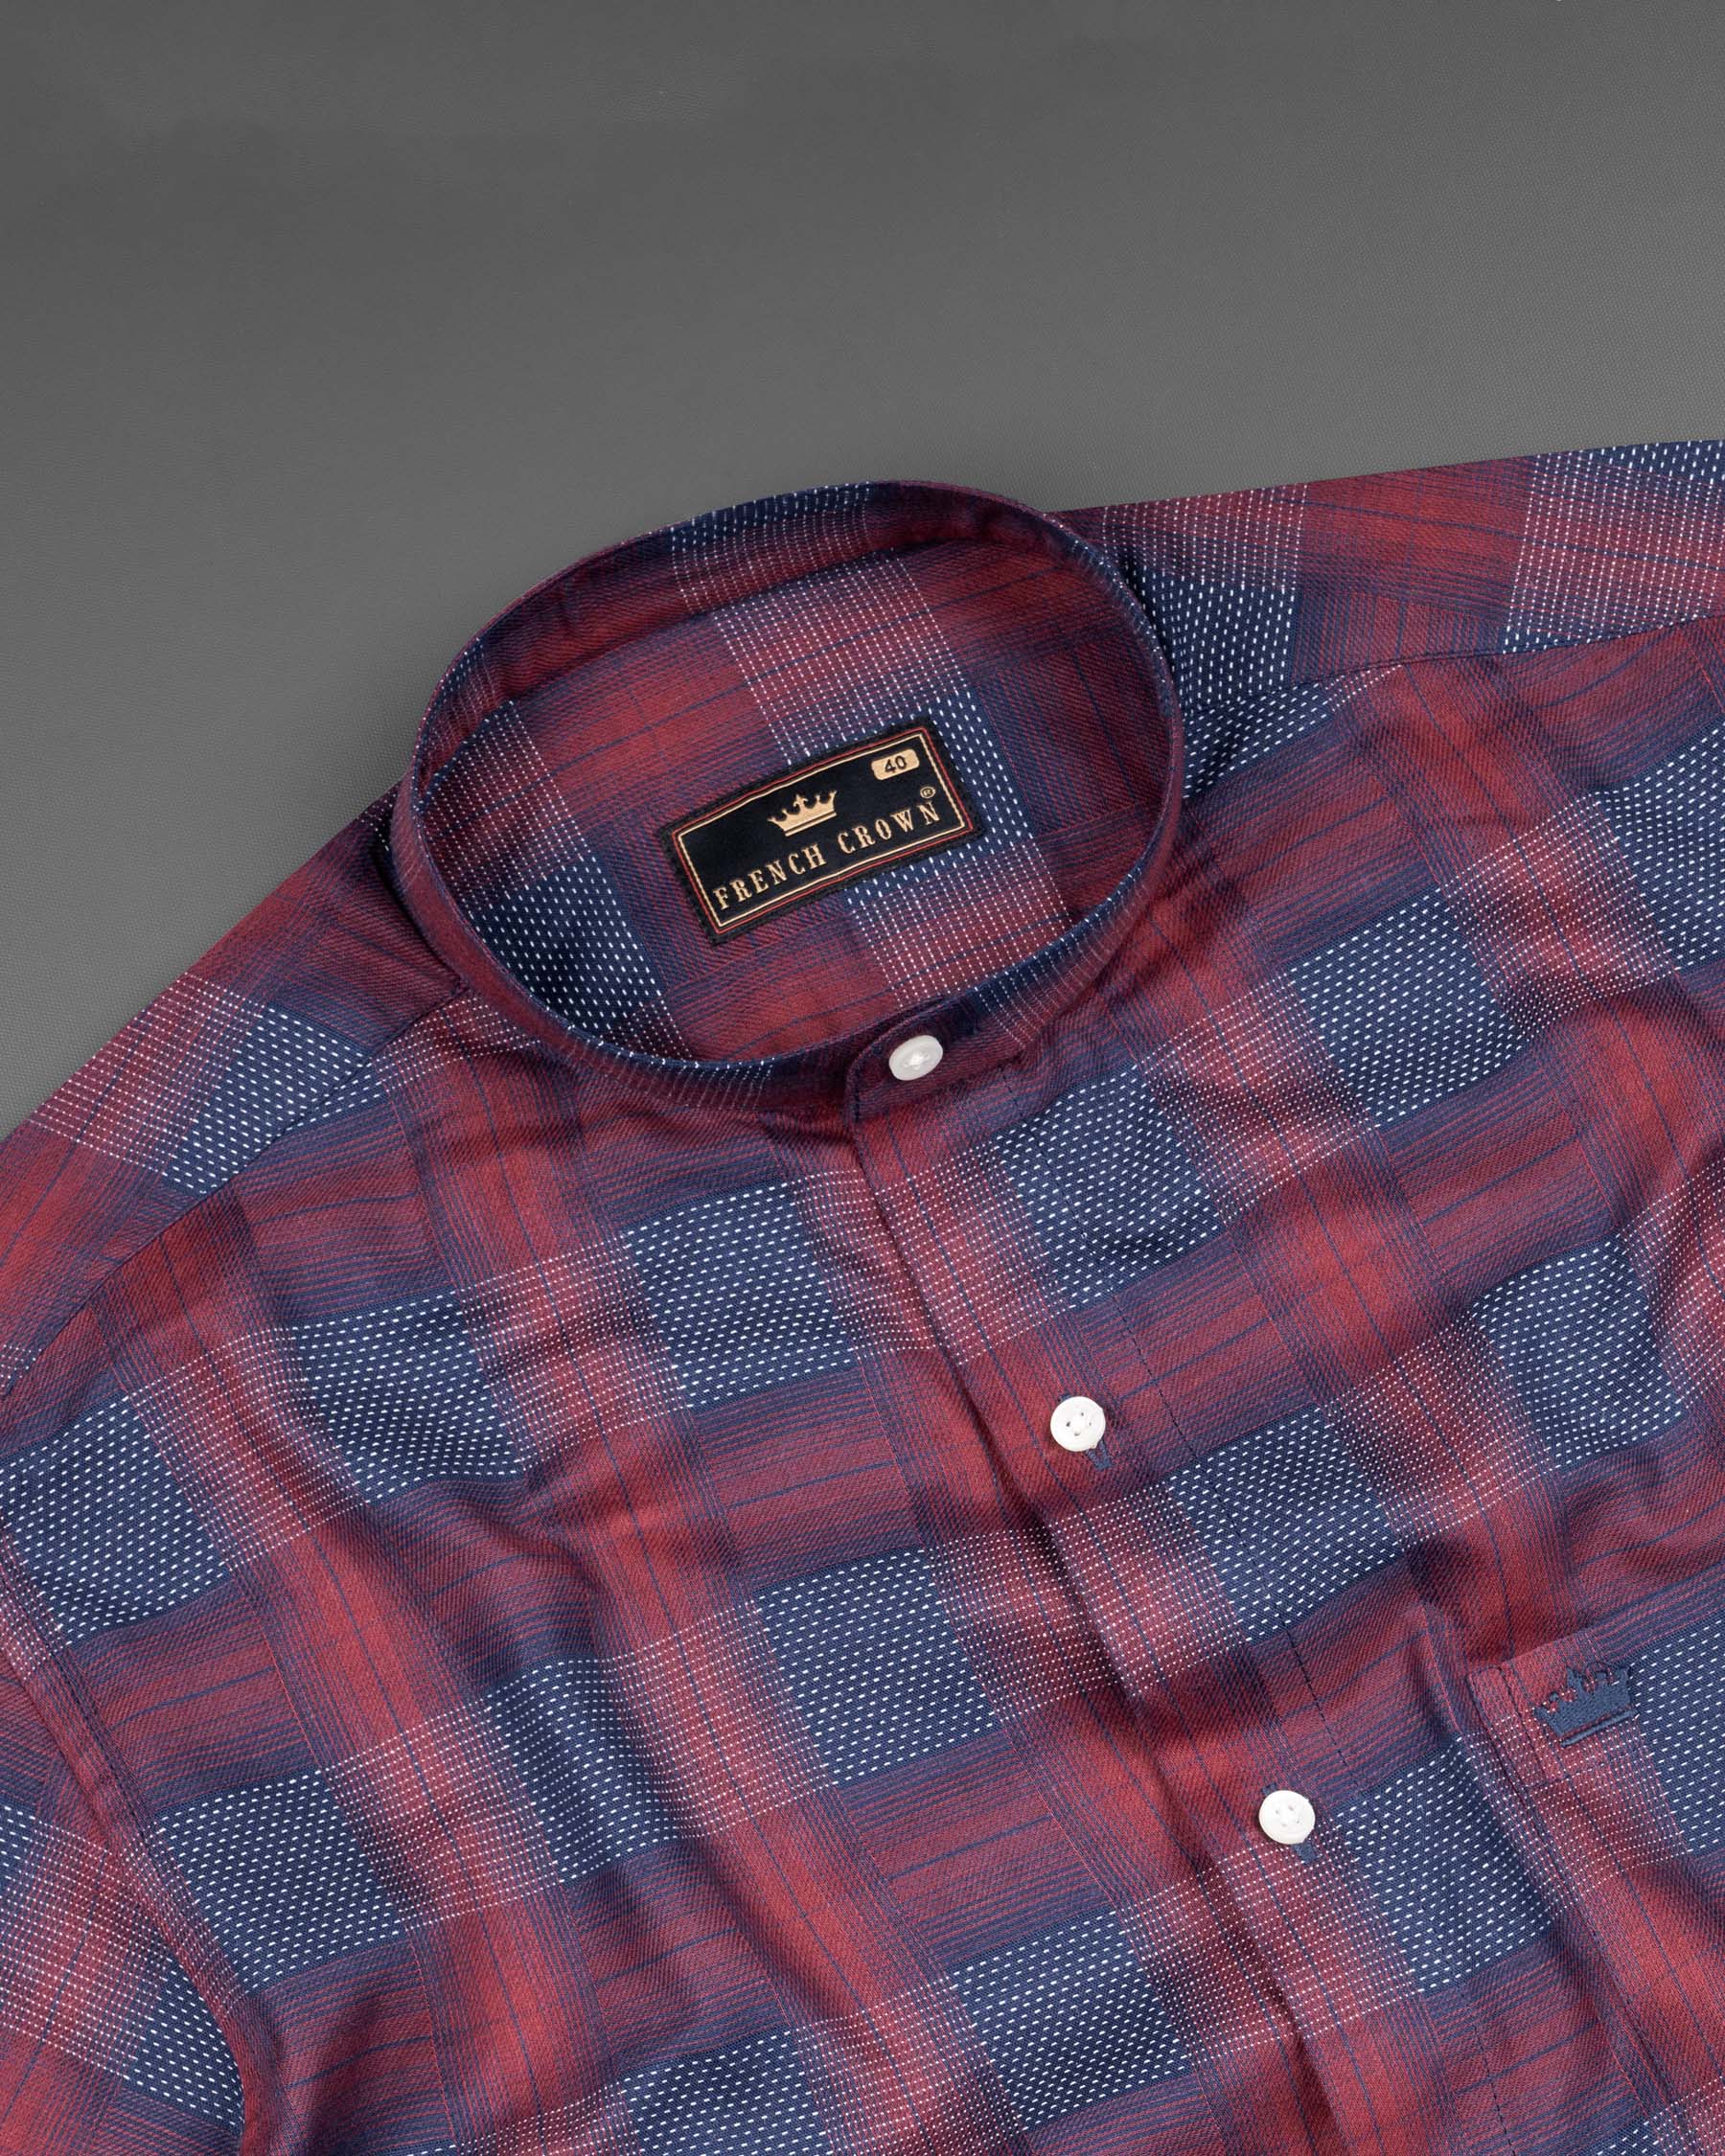 Claret Red with East Bay Twill Plaid Premium Cotton Shirt 6736-M-38,6736-M-38,6736-M-39,6736-M-39,6736-M-40,6736-M-40,6736-M-42,6736-M-42,6736-M-44,6736-M-44,6736-M-46,6736-M-46,6736-M-48,6736-M-48,6736-M-50,6736-M-50,6736-M-52,6736-M-52